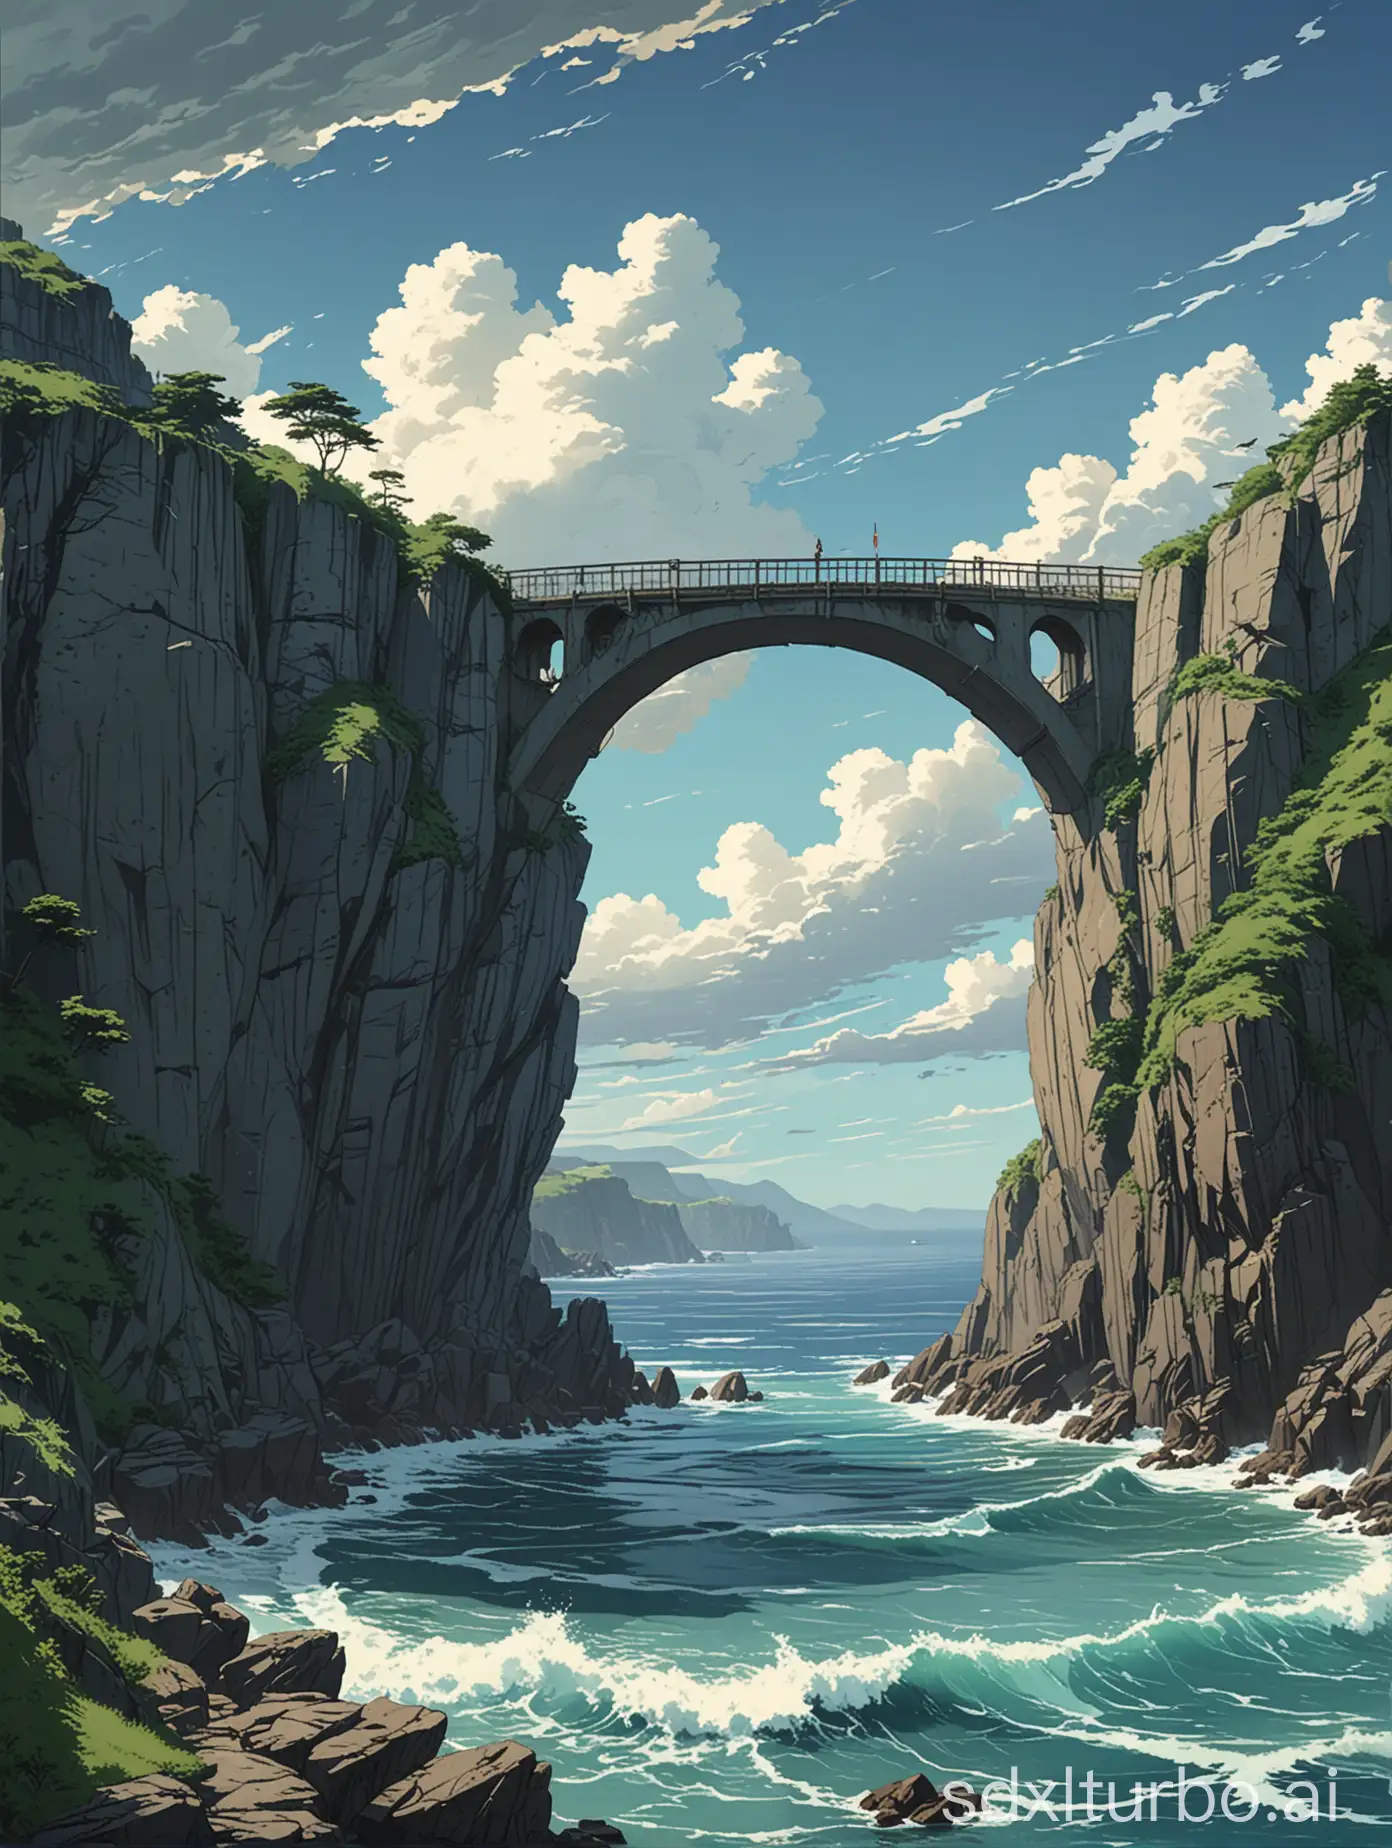 Studio ghibli anime style,A scenic coastal landscape featuring a tall concrete arch bridge extending over a deep ravine. In the background, rugged cliffs line the shoreline, with waves crashing against them. The scene is framed by rolling hills and a mountainous horizon, set under a partly cloudy sky. The ocean stretches to the right with a mix of light and dark blue hues.